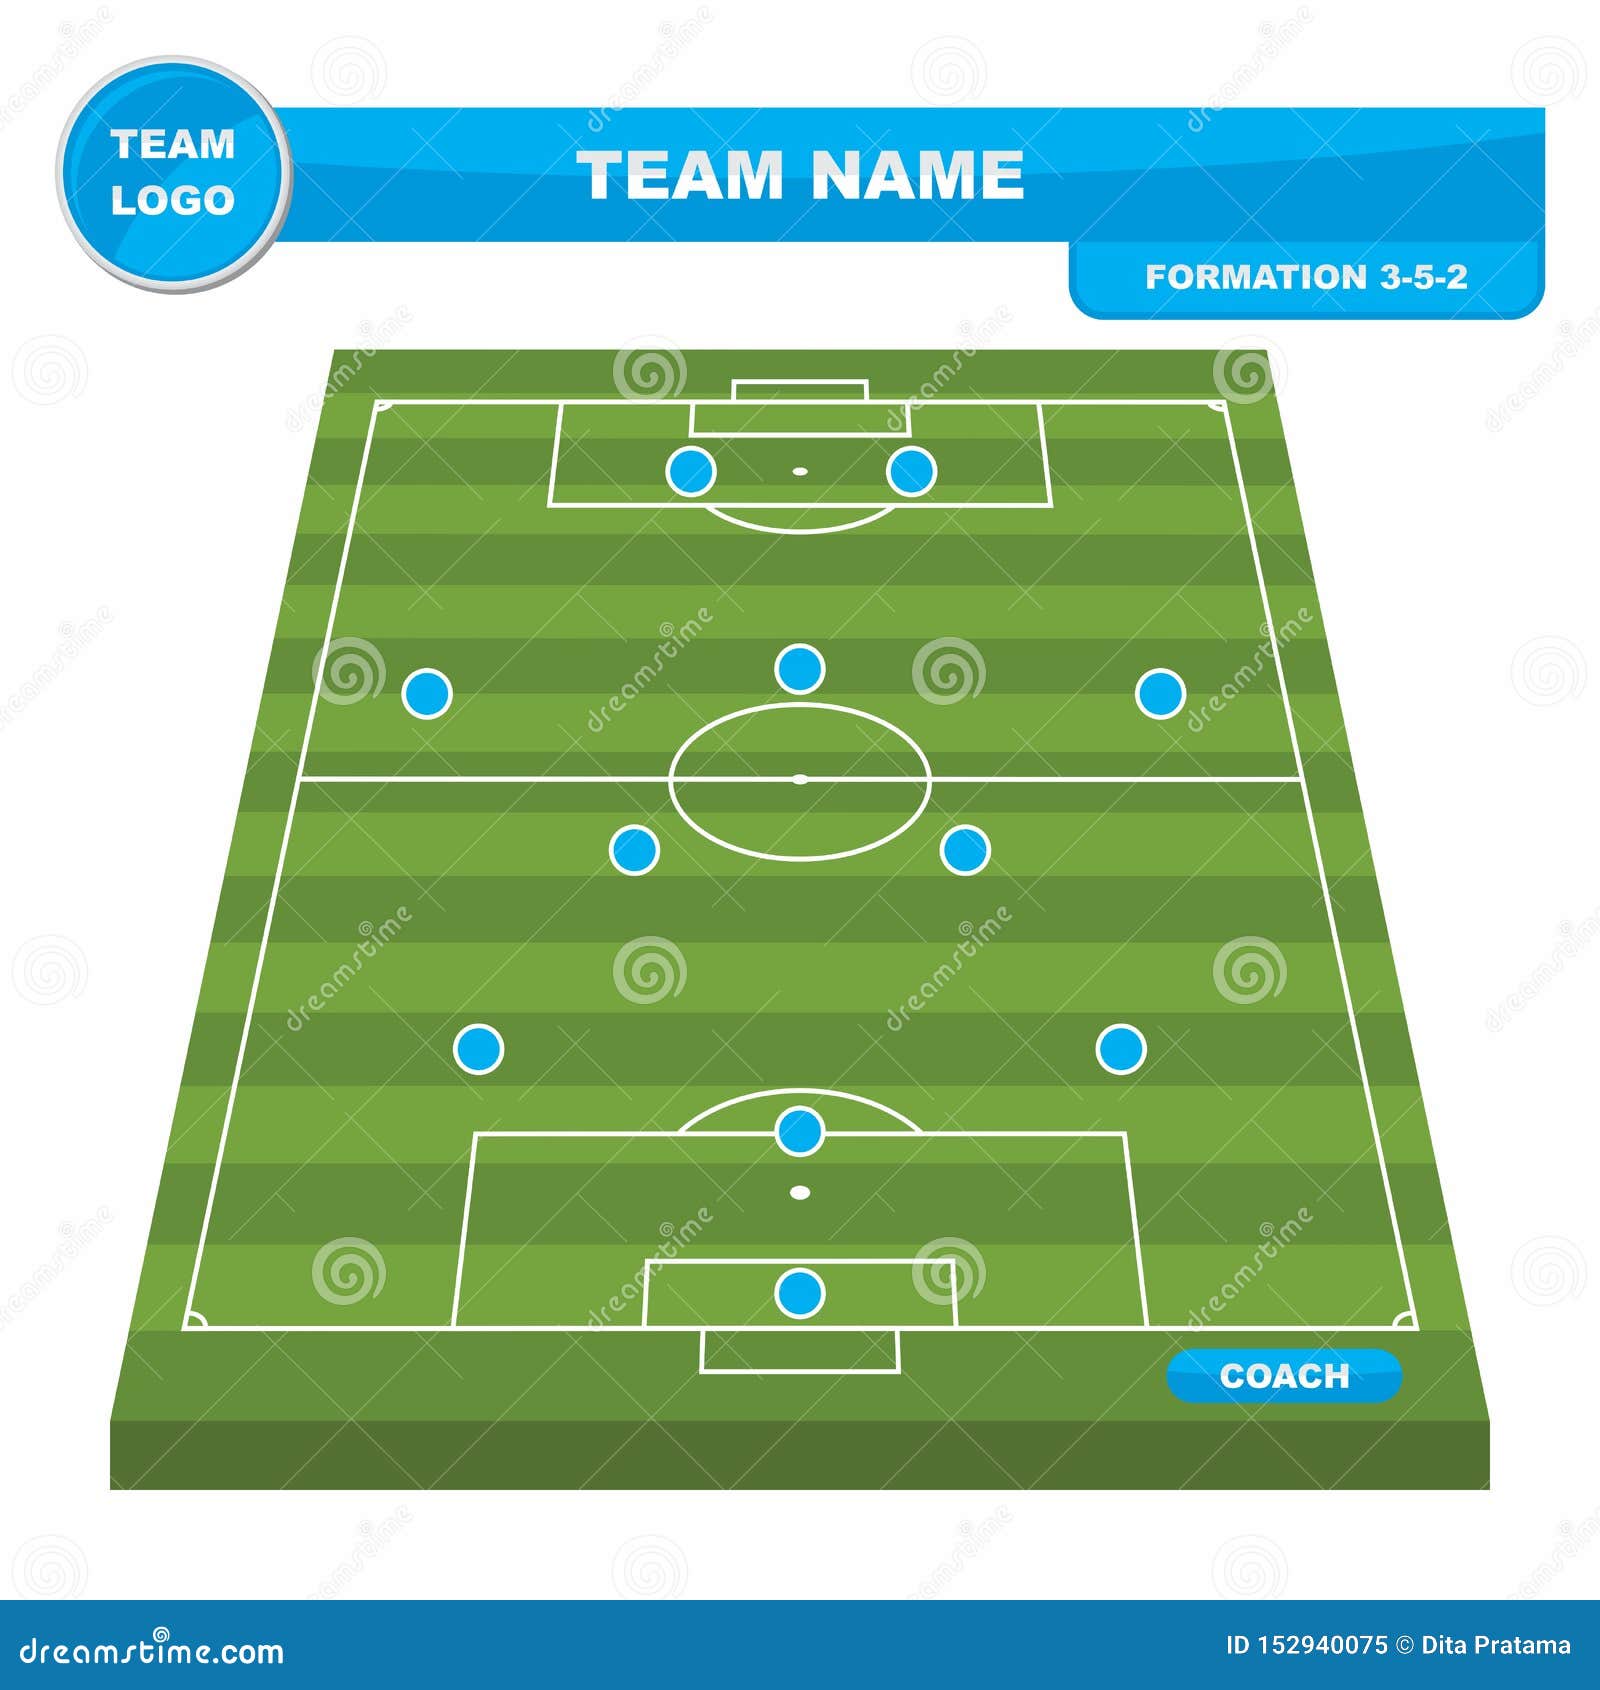 Albums 97+ Images 4-4-2 soccer formation template Stunning